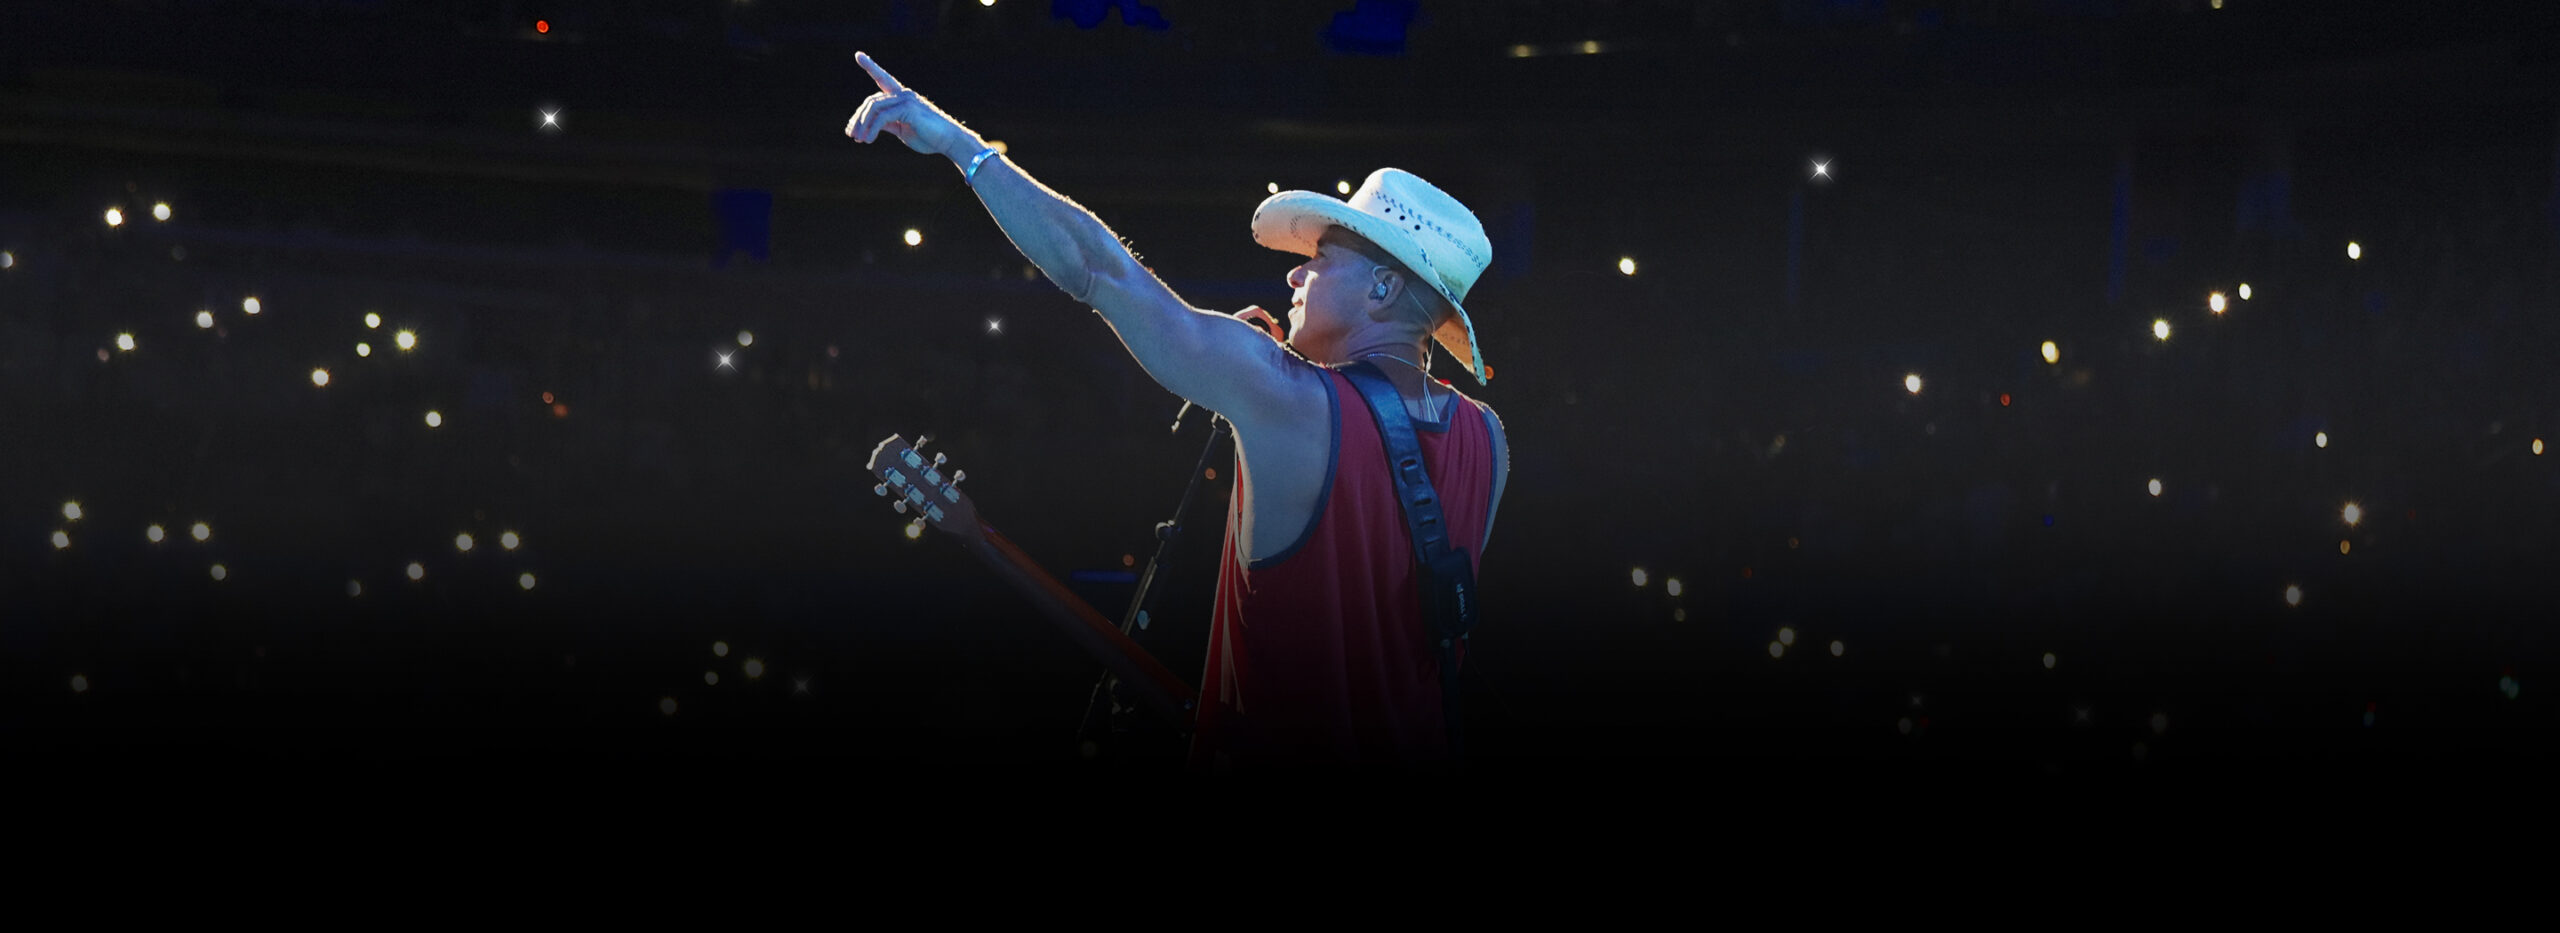 Wichita Events - Kenny Chesney - March 2023 at Intrust Bank Arena